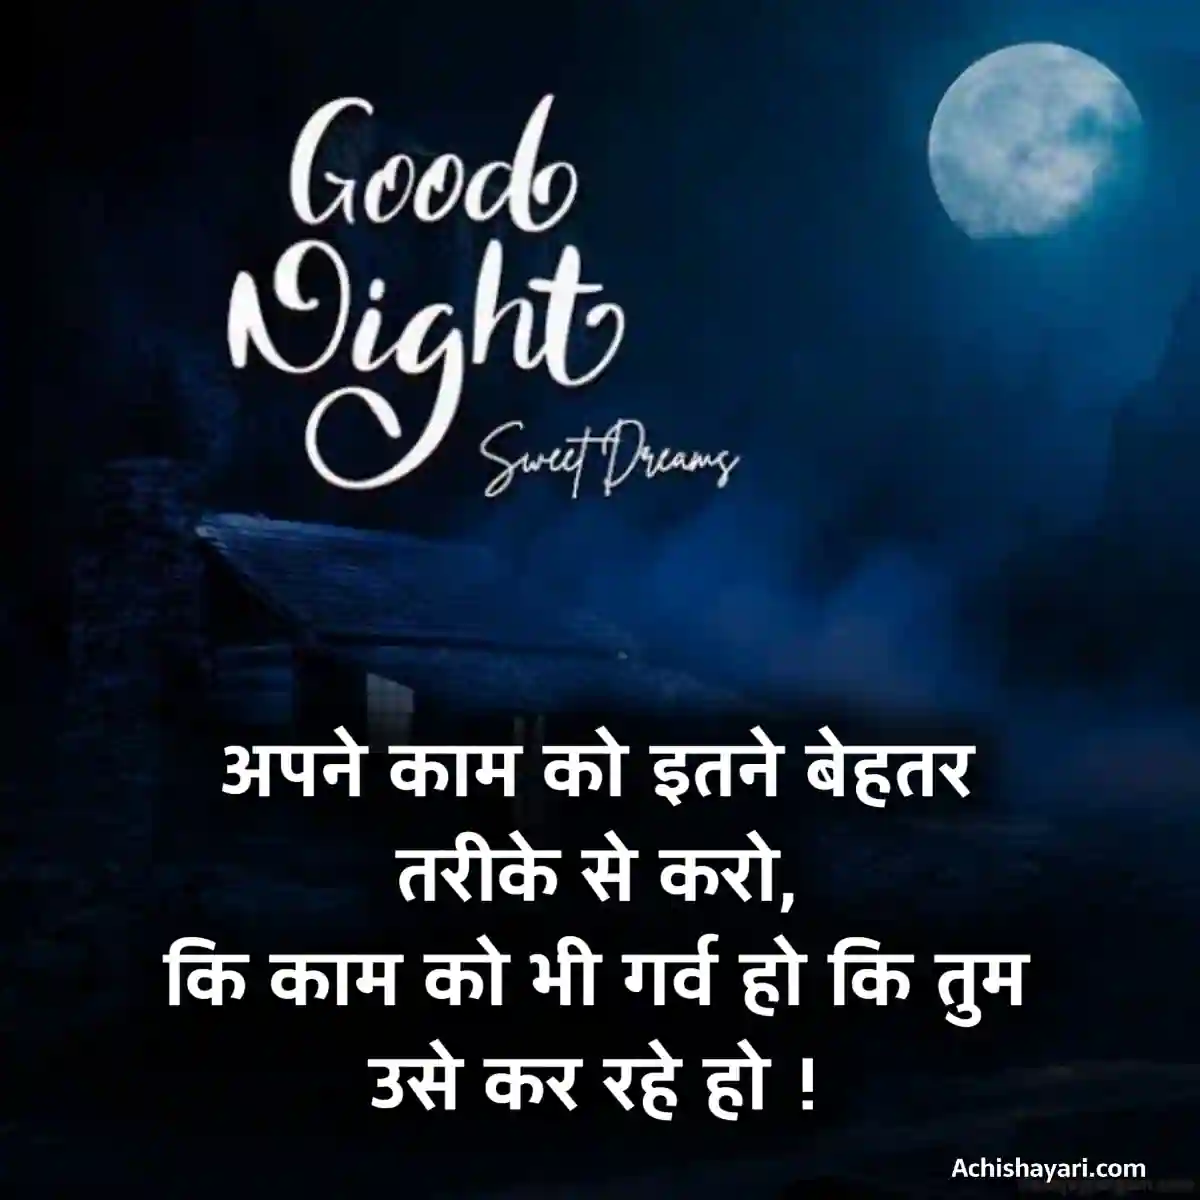 Extensive Collection of Full 4K Good Night Images in Hindi: Top 999+